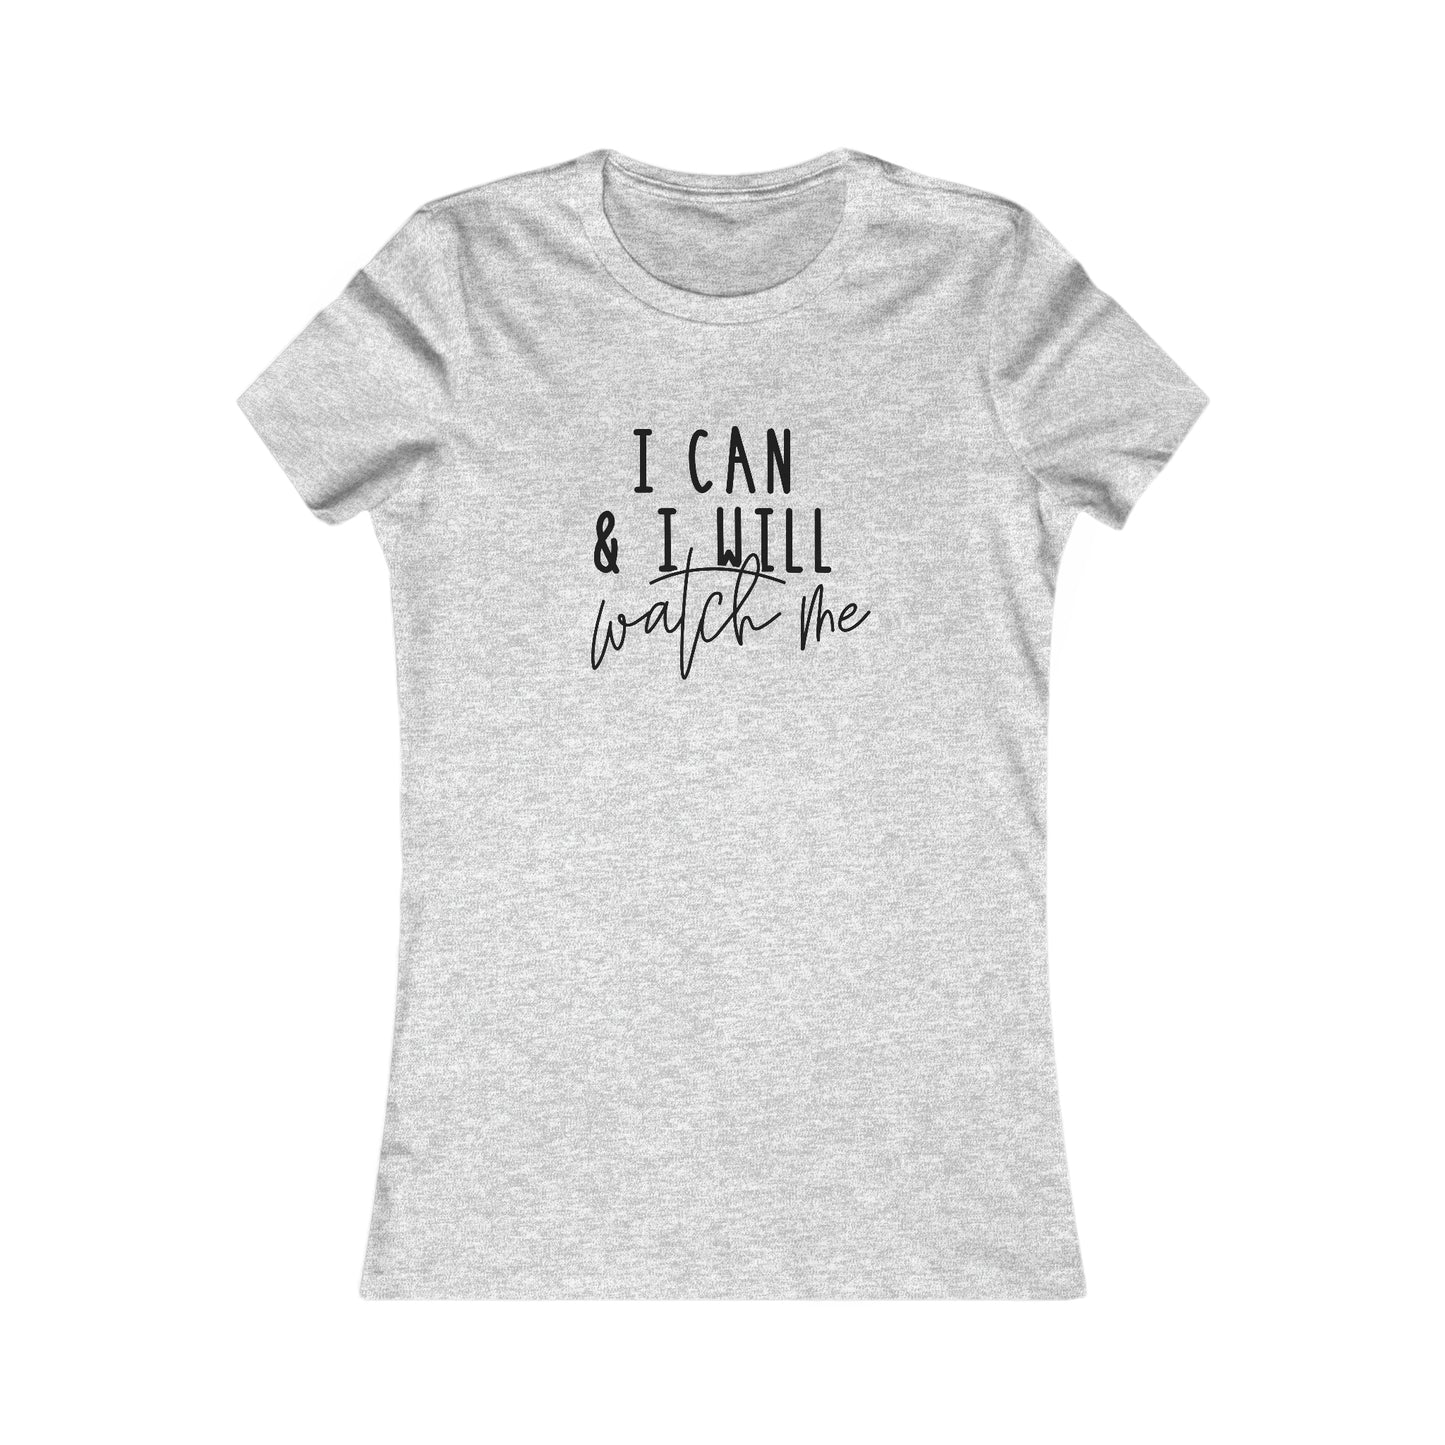 I Can, I Will - Women's Favorite Tee